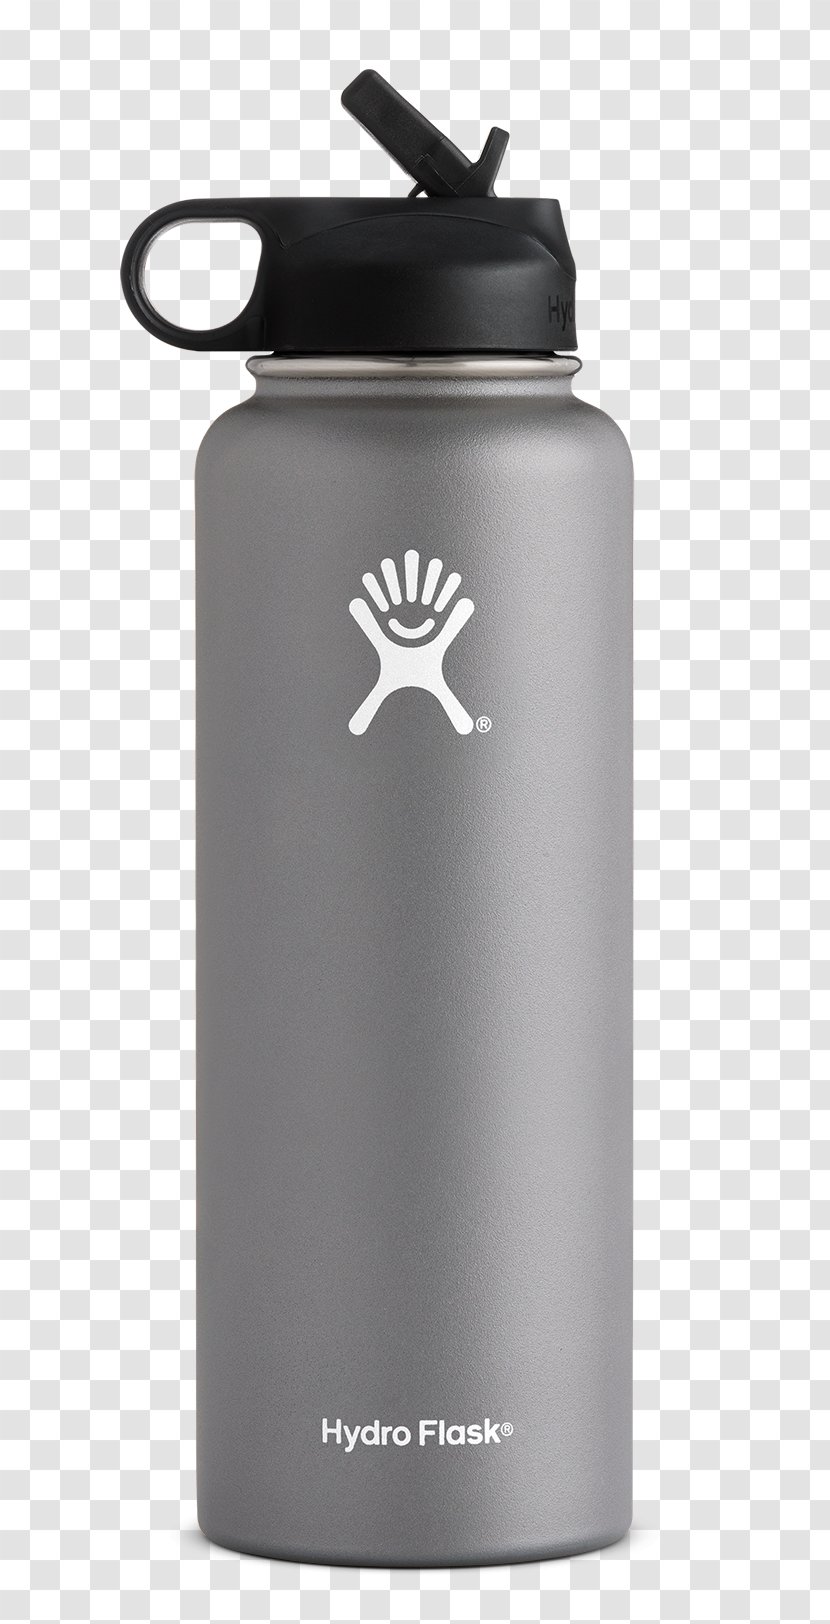 Lid Water Bottles Hydro Flask Thermoses - Bottle Transparent PNG